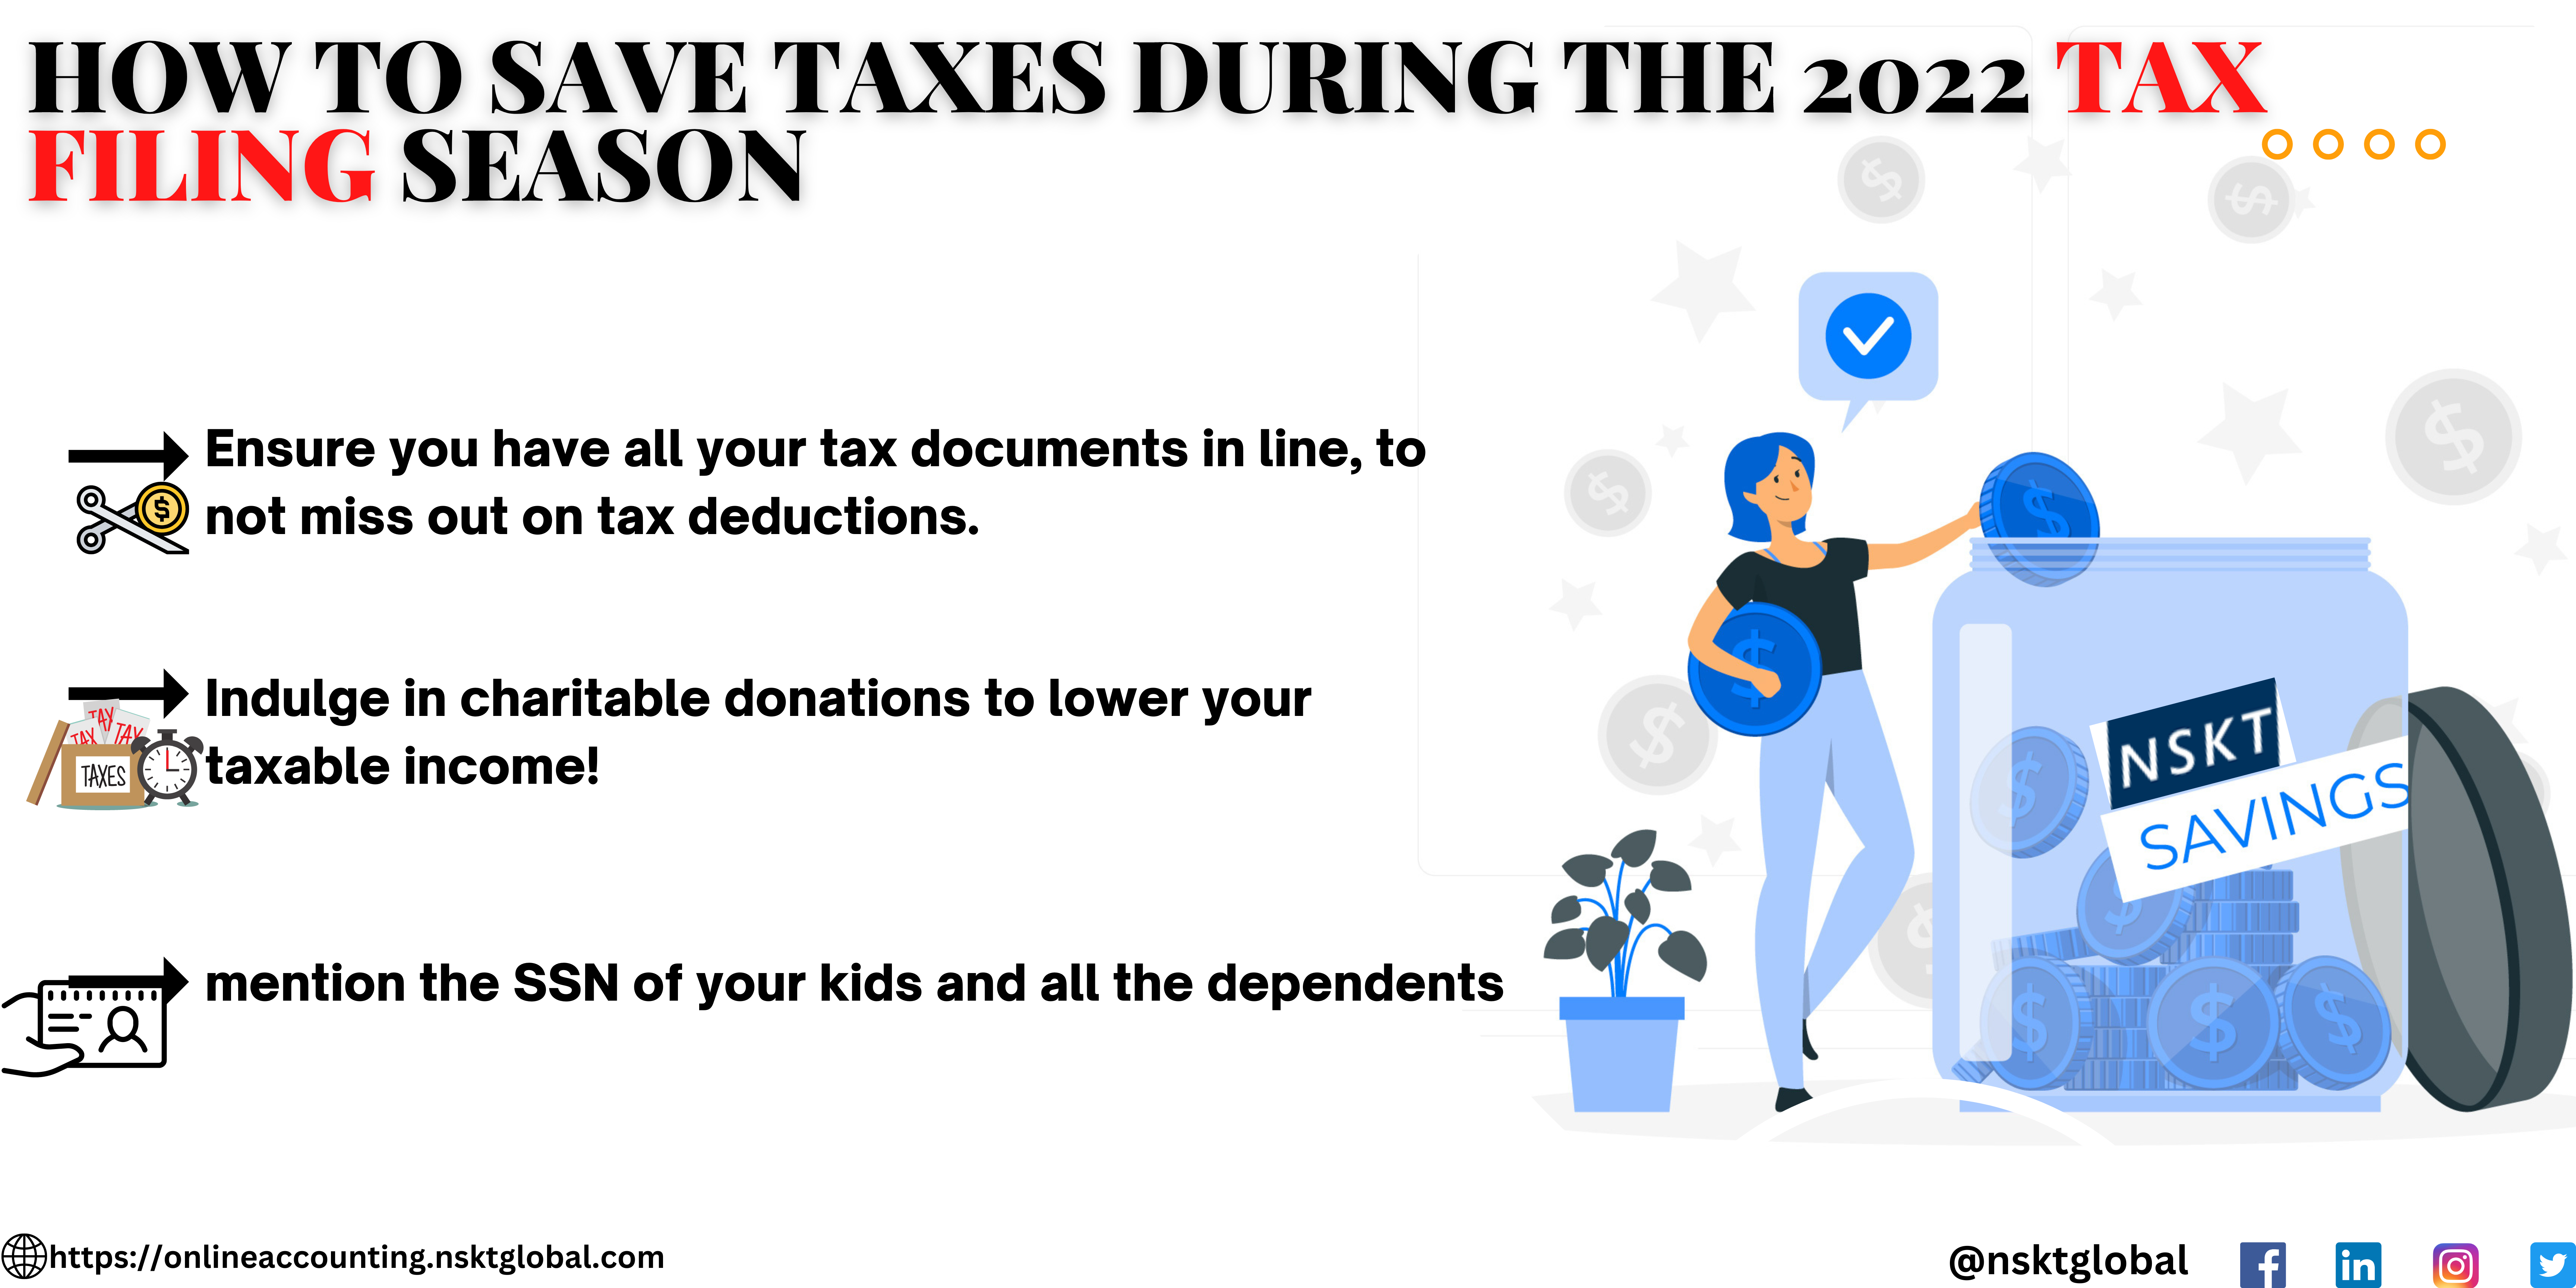  How to Save Taxes during Tax Filing Season 2022